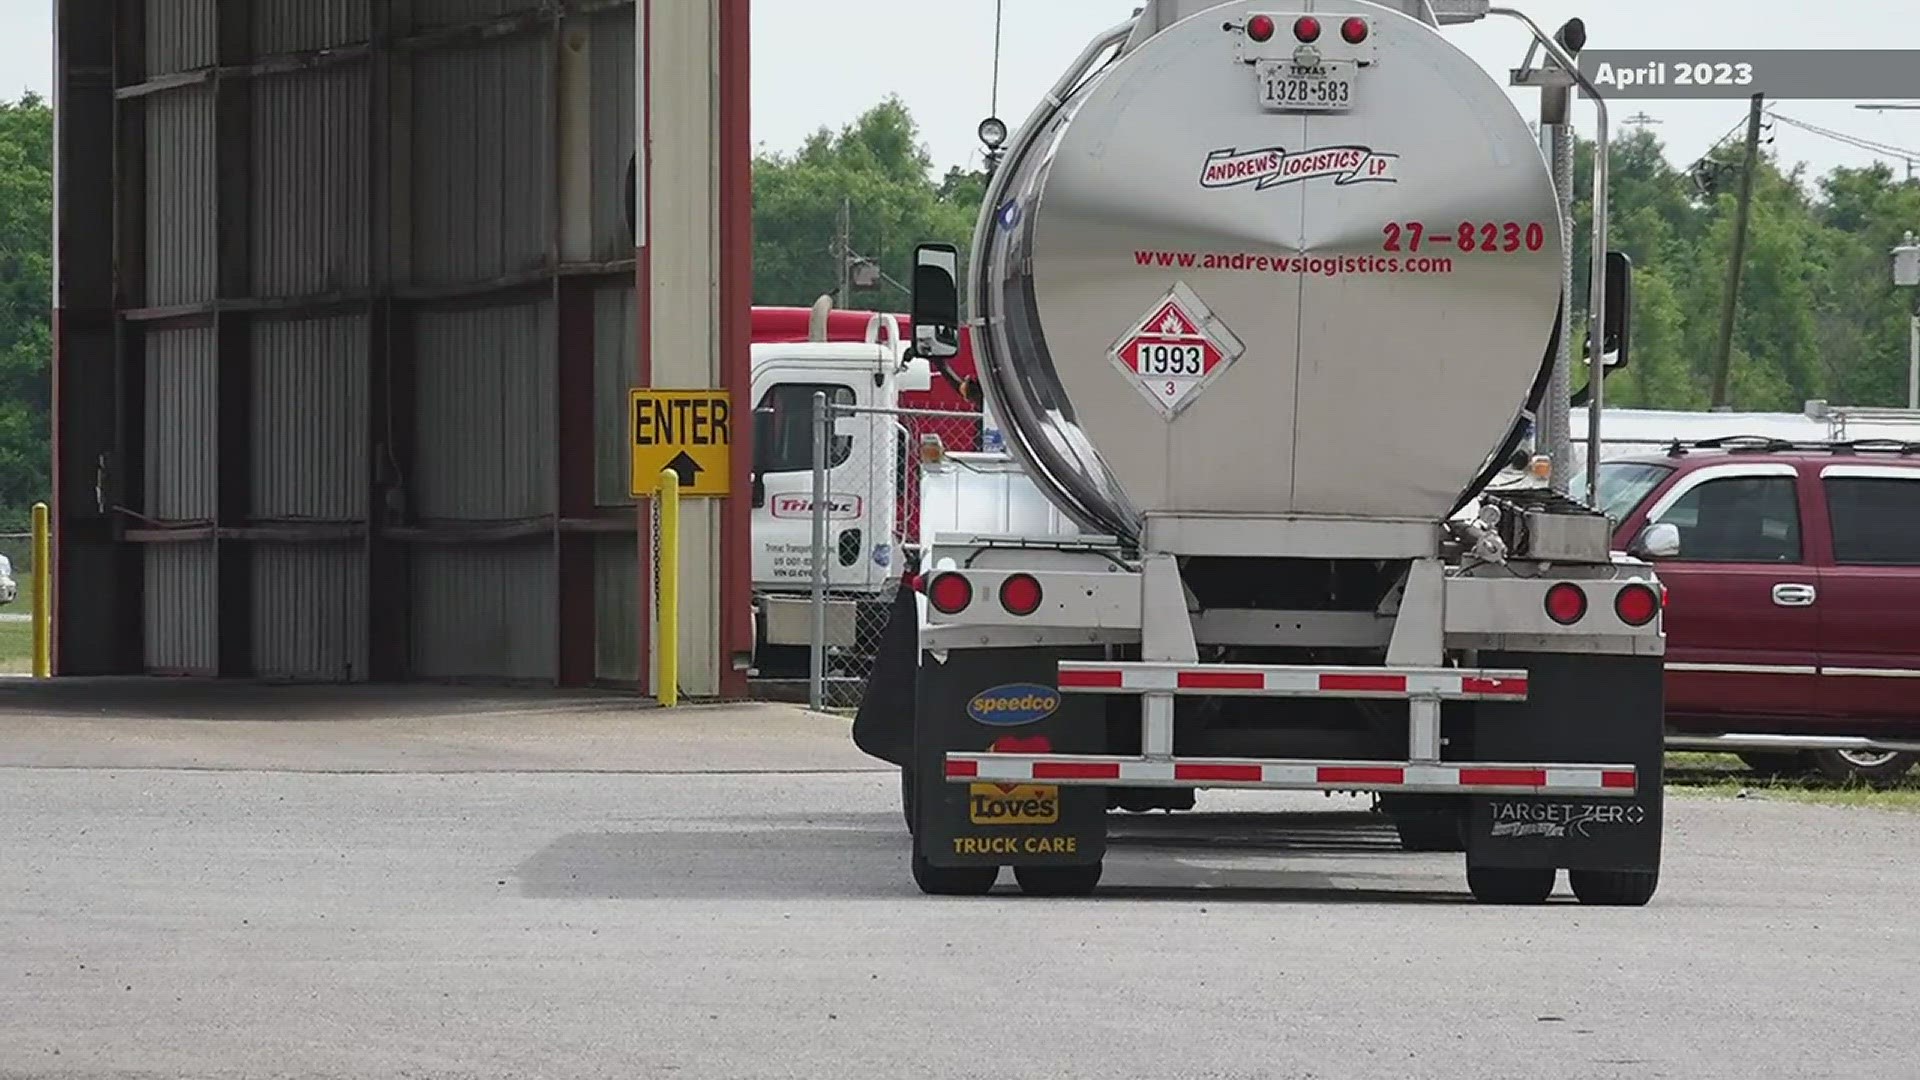 A Canadian company has been fined nearly $400,000 by OSHA for failing to protect its workers in Beaumont from toxic gas while cleaning out a tanker truck in April.